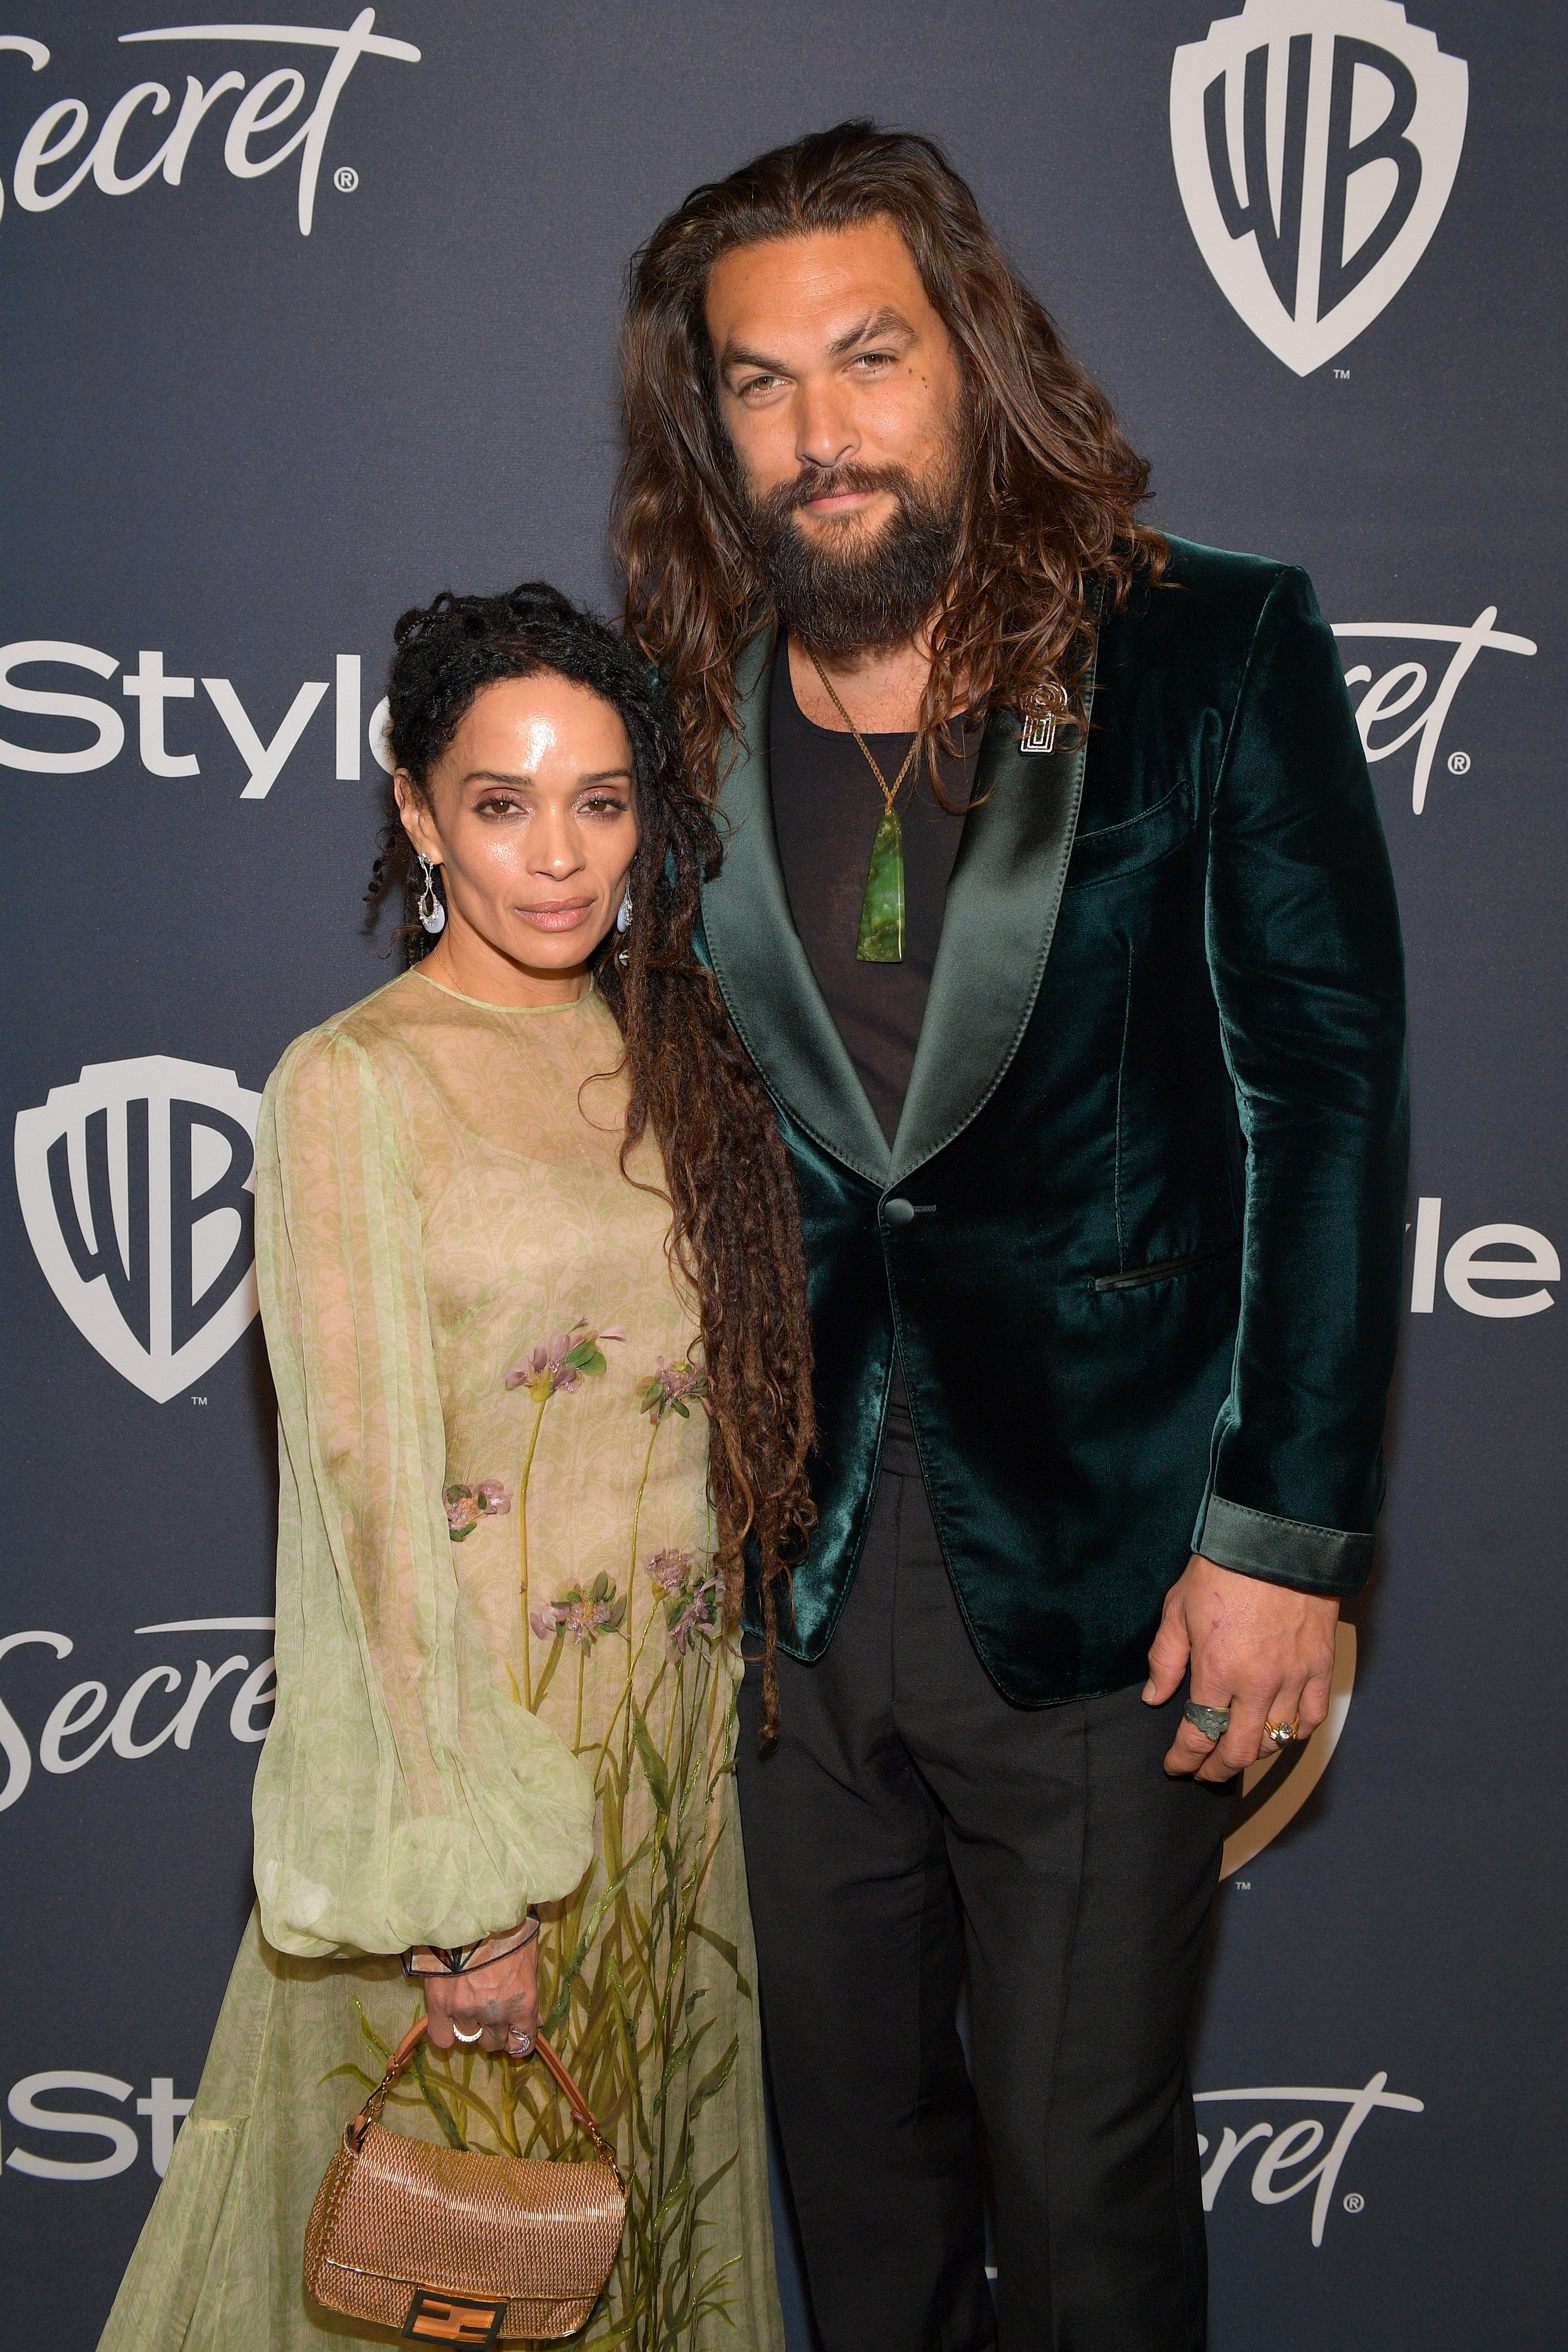 Lisa Bonet and husband Jason Momoa attend The 2020 InStyle and Warner Bros. 77th Annual Golden Globe Awards post-party at The Beverly Hilton Hotel on January 05, 2020 in Beverly Hills, California. | Source: Getty Images